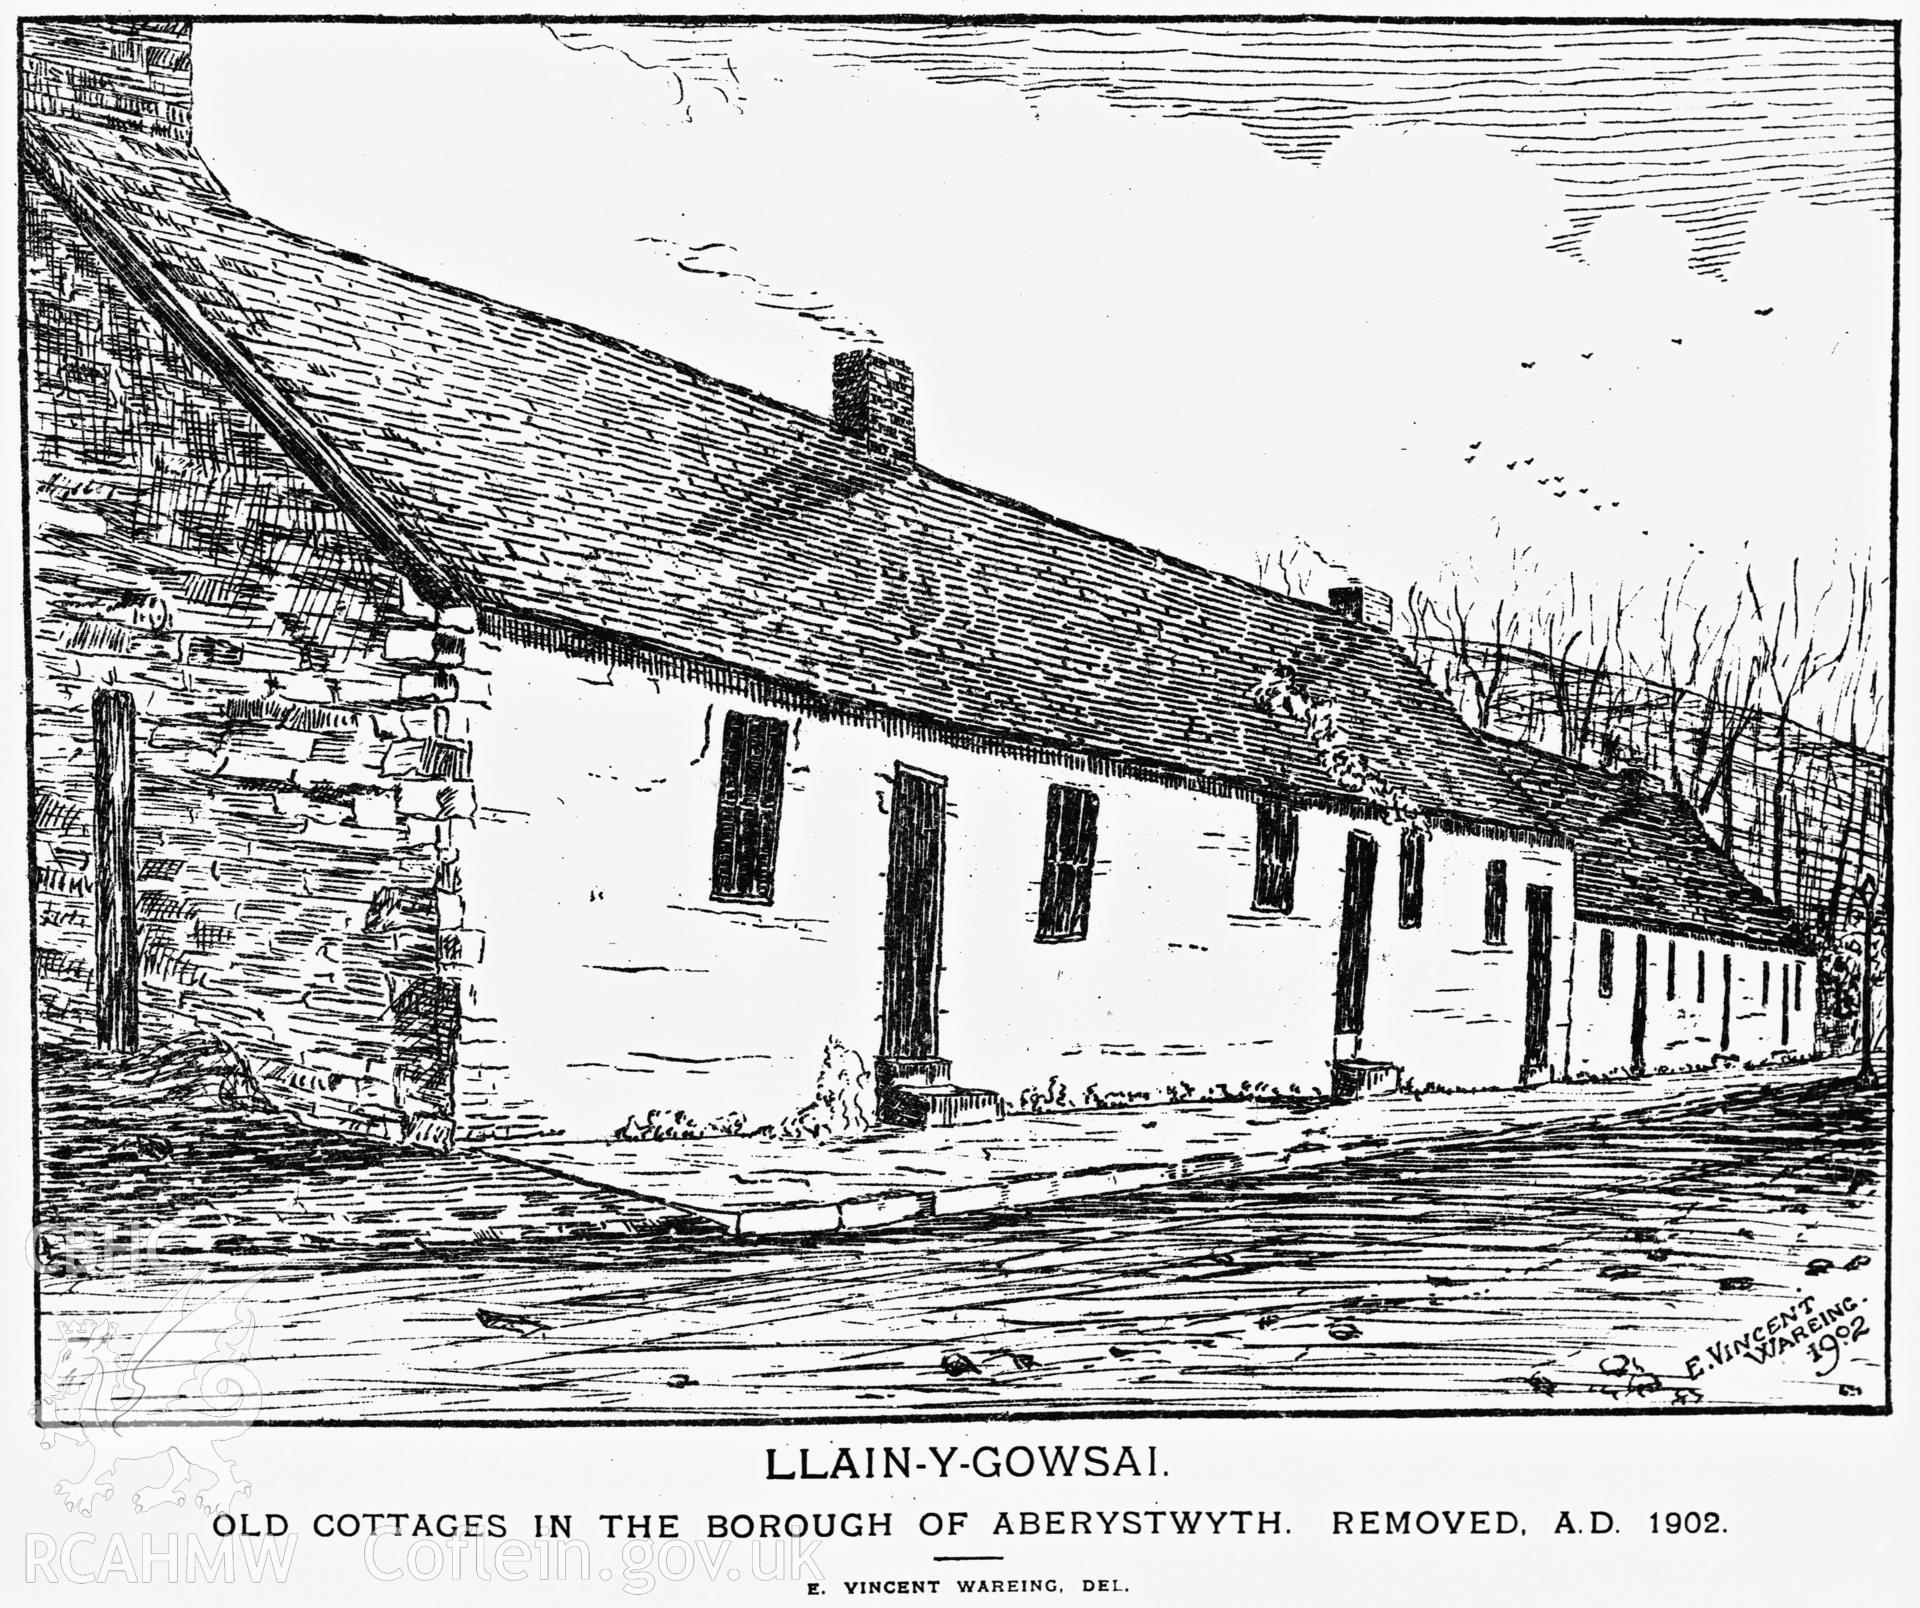 Black and white acetate negative showing an engraving of cottages at Llangawsai.